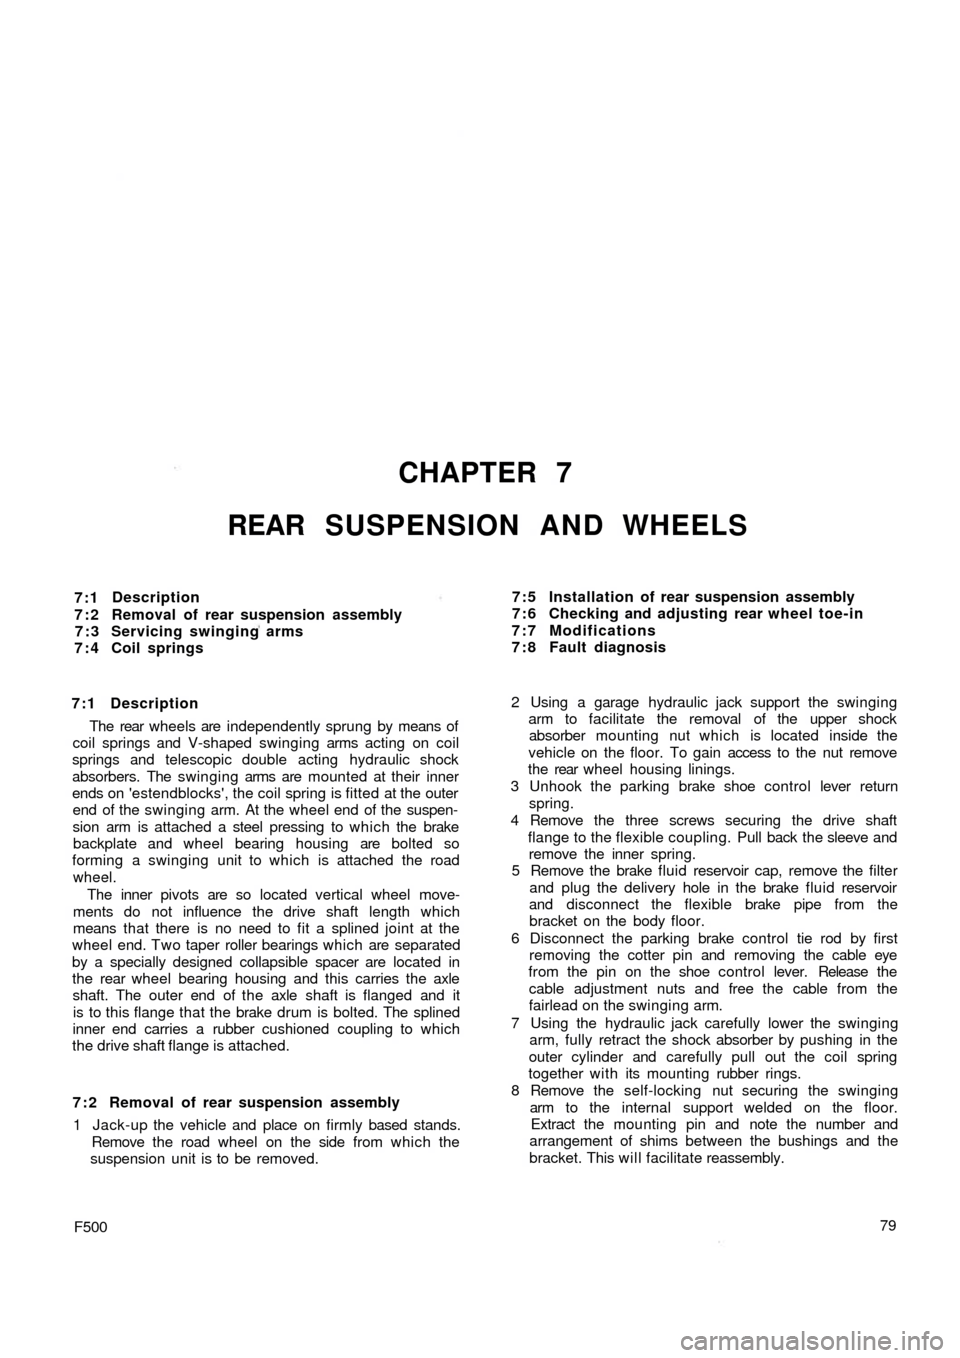 FIAT 500 1960 1.G Workshop Manual CHAPTER 7
REAR SUSPENSION AND WHEELS
7:1
7:2
7:3
7:4Description
Removal of rear suspension assembly
Servicing swinging arms
Coil springs
7:1 Description
The  rear  wheels are independently sprung by m